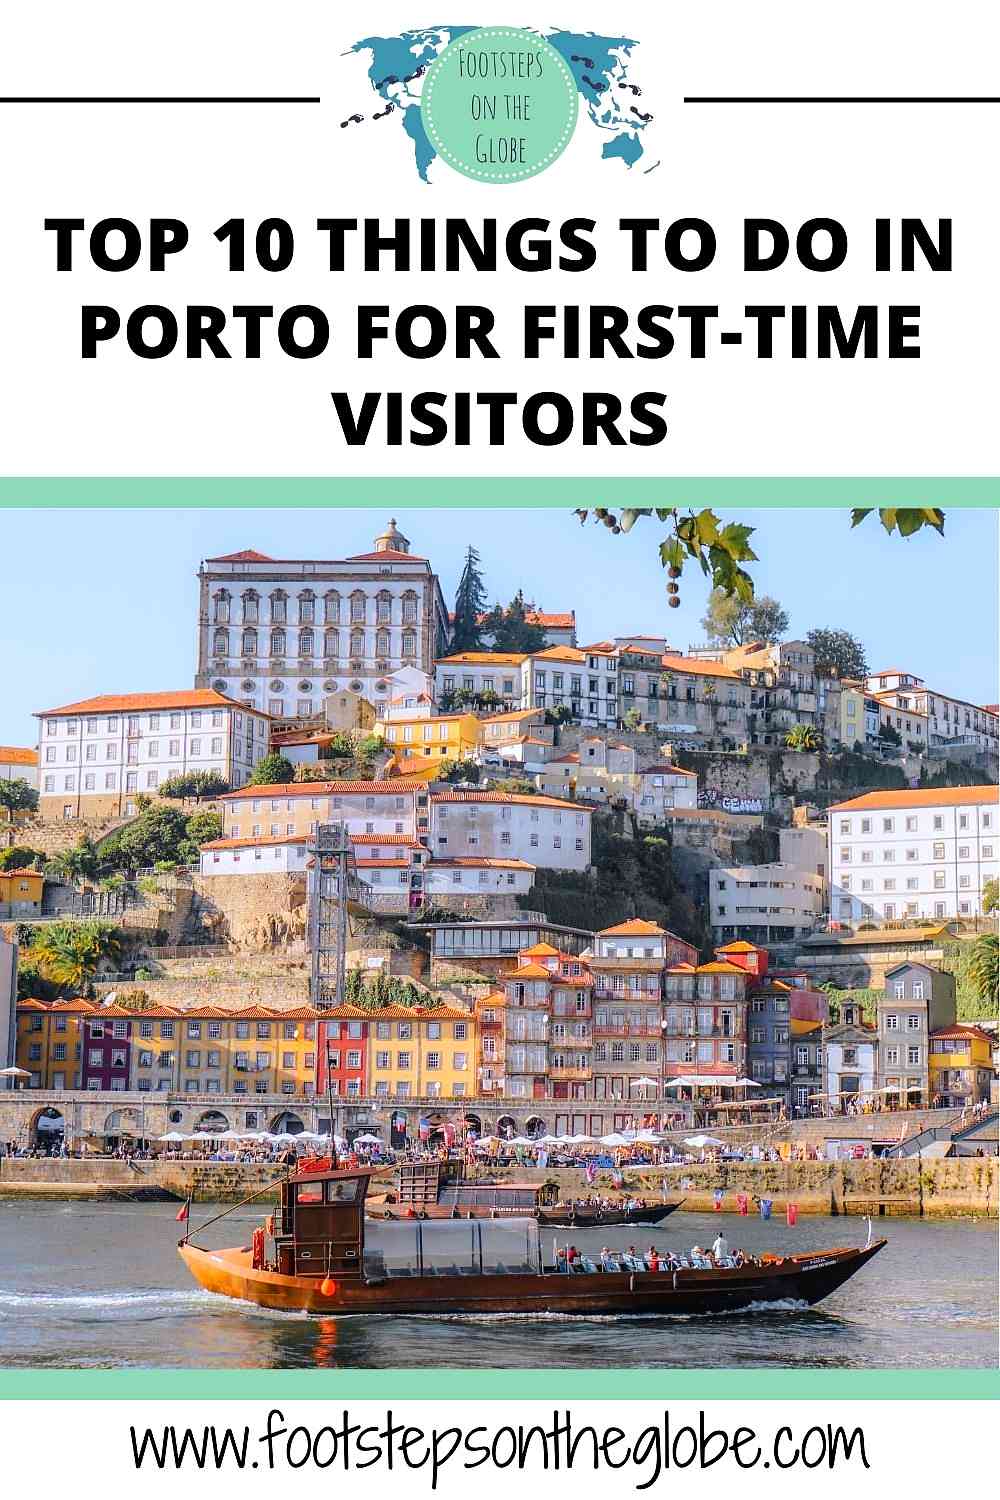 Pinterest image of Porto's port with colourful townhouses on the edge of a cliff and a sail boat going past in the water with the text: "Top 10 things to do in Porto for first-time visitors"